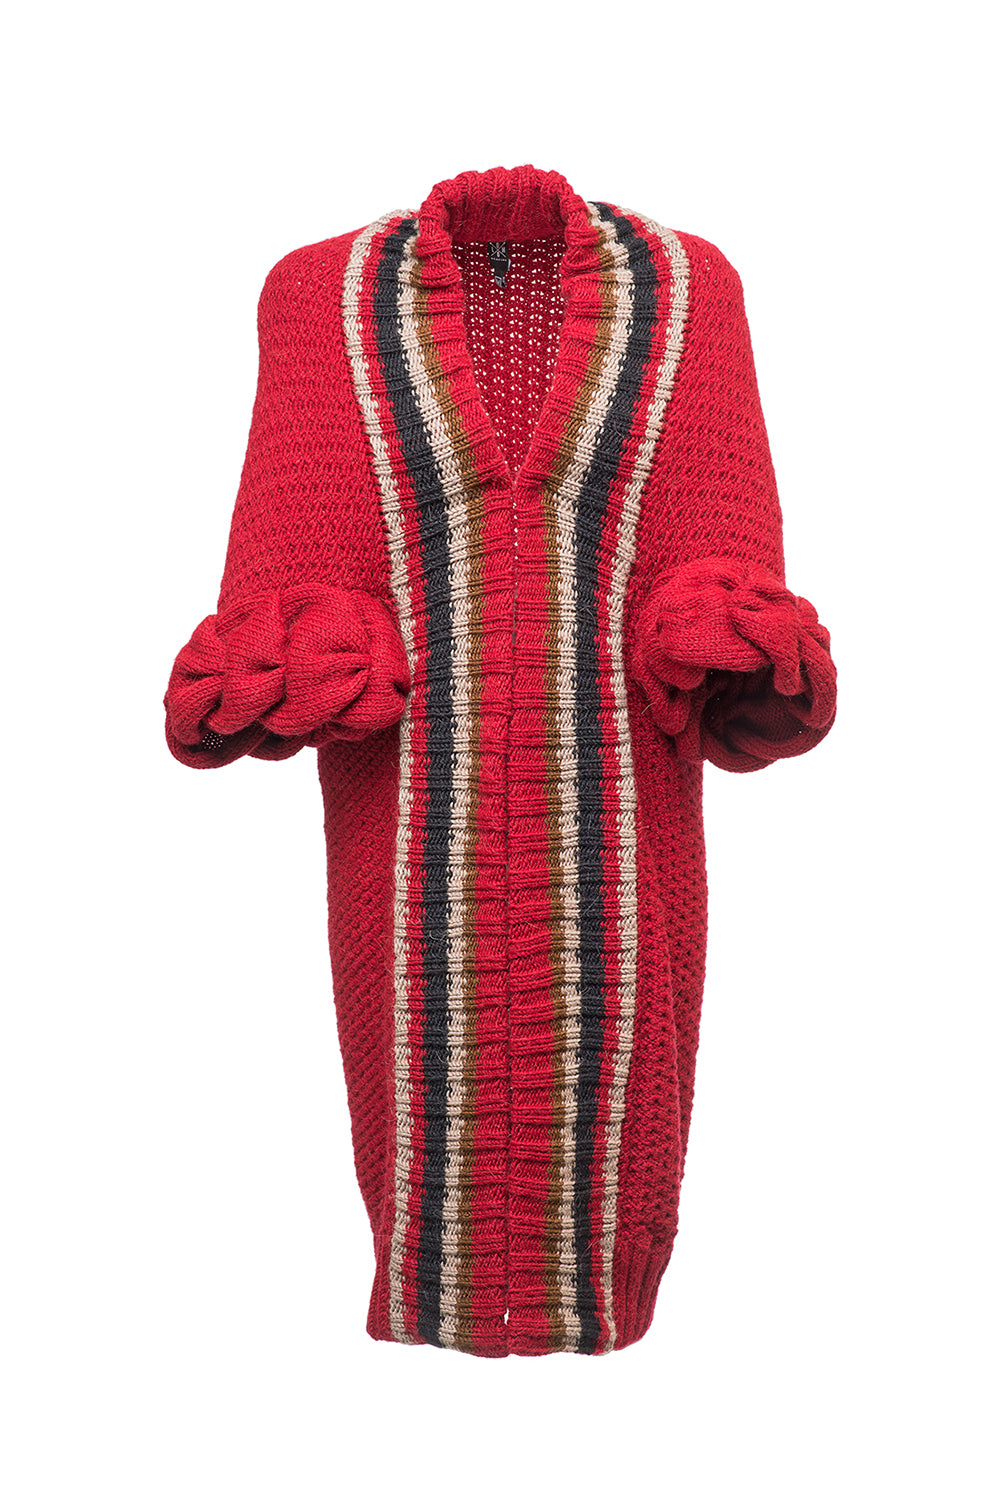 Knitted red cardigan  by LOOM with braids